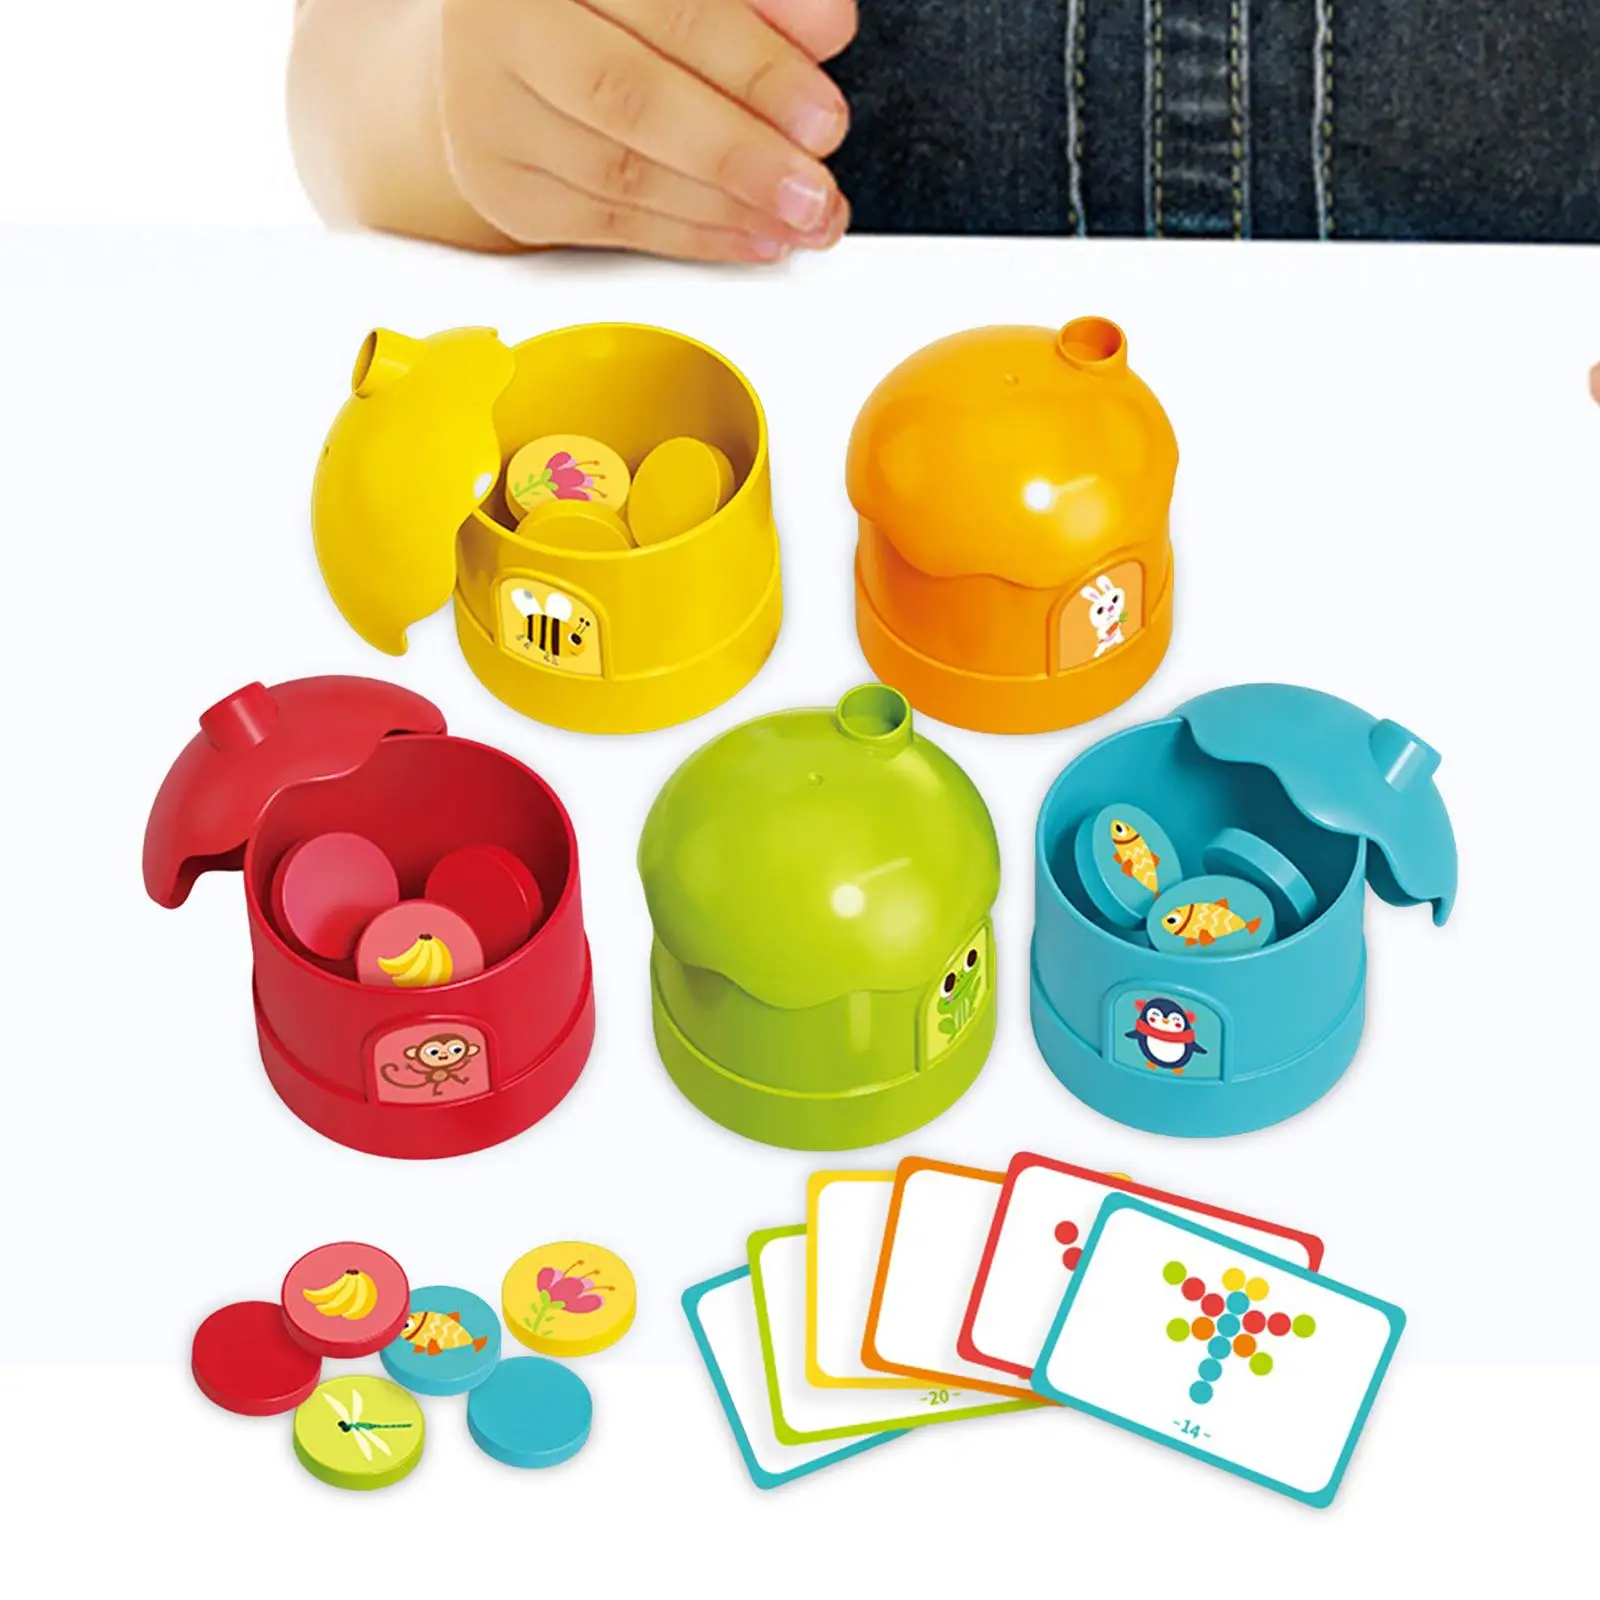 Educational Color Sorting Cup Birthday Puzzle for Activities Nursery